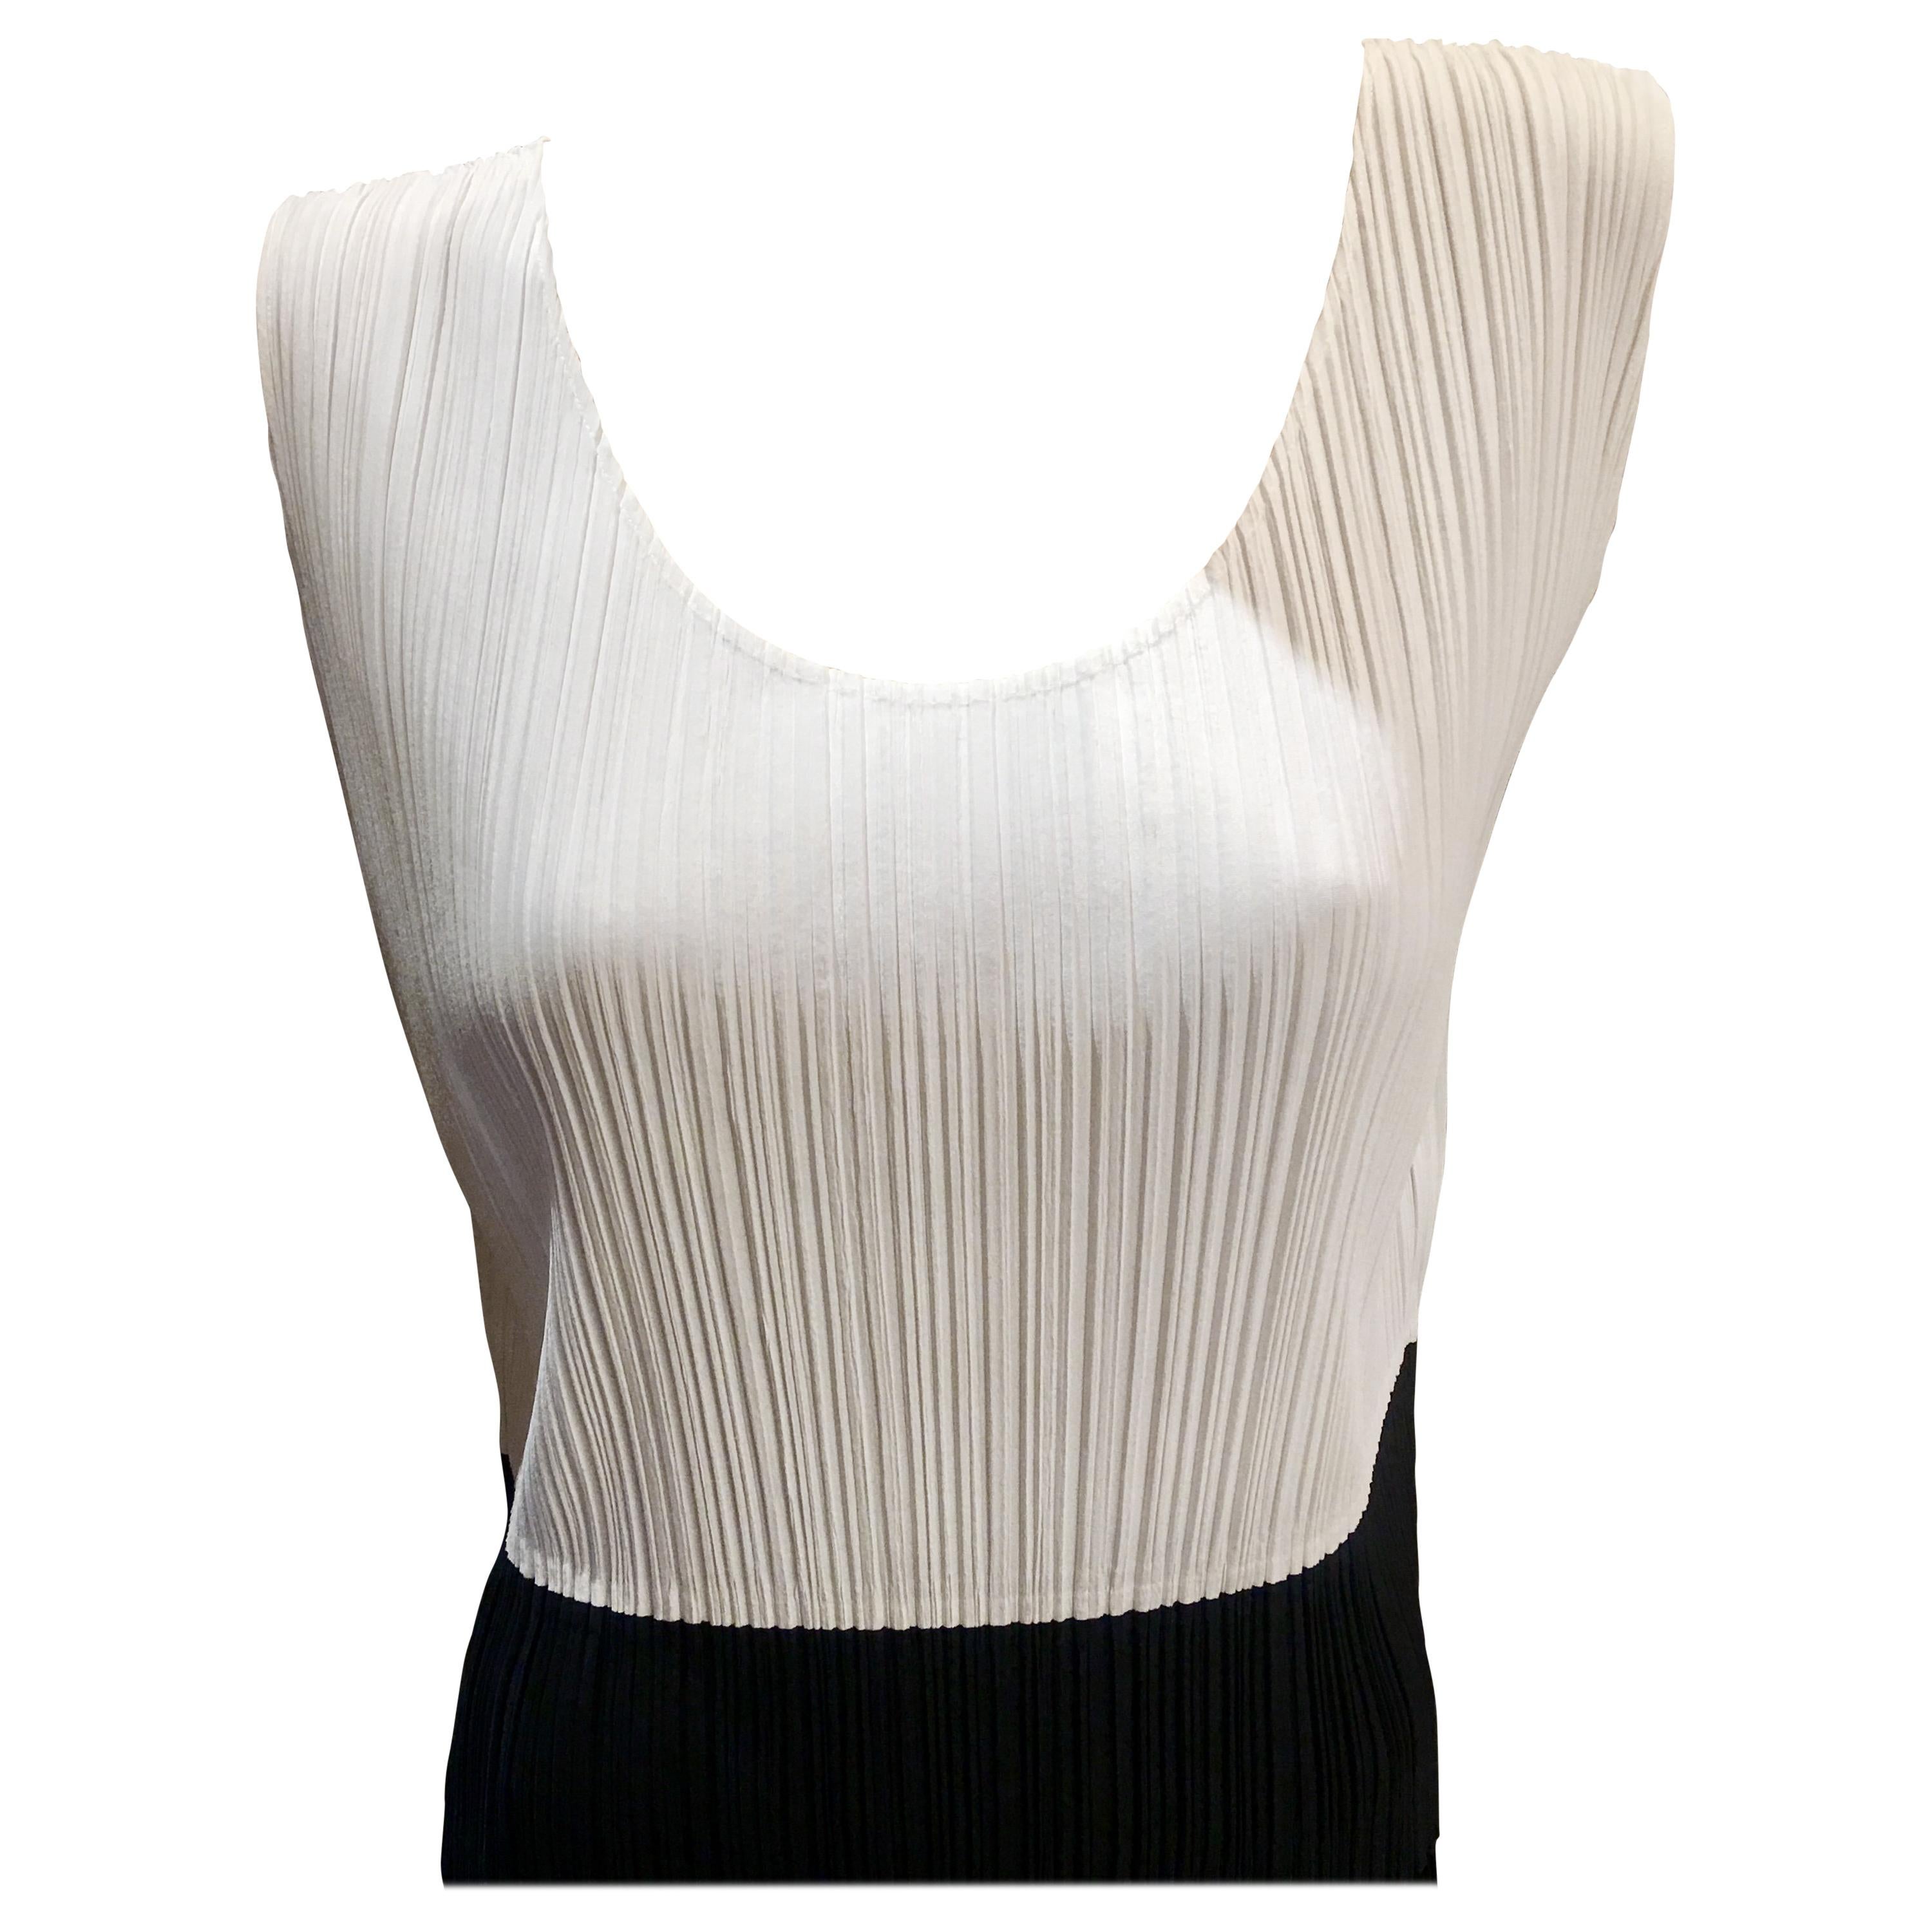 1990s Issey Miyake Sleeveless Top "Pleats Please" Black and White Color Block